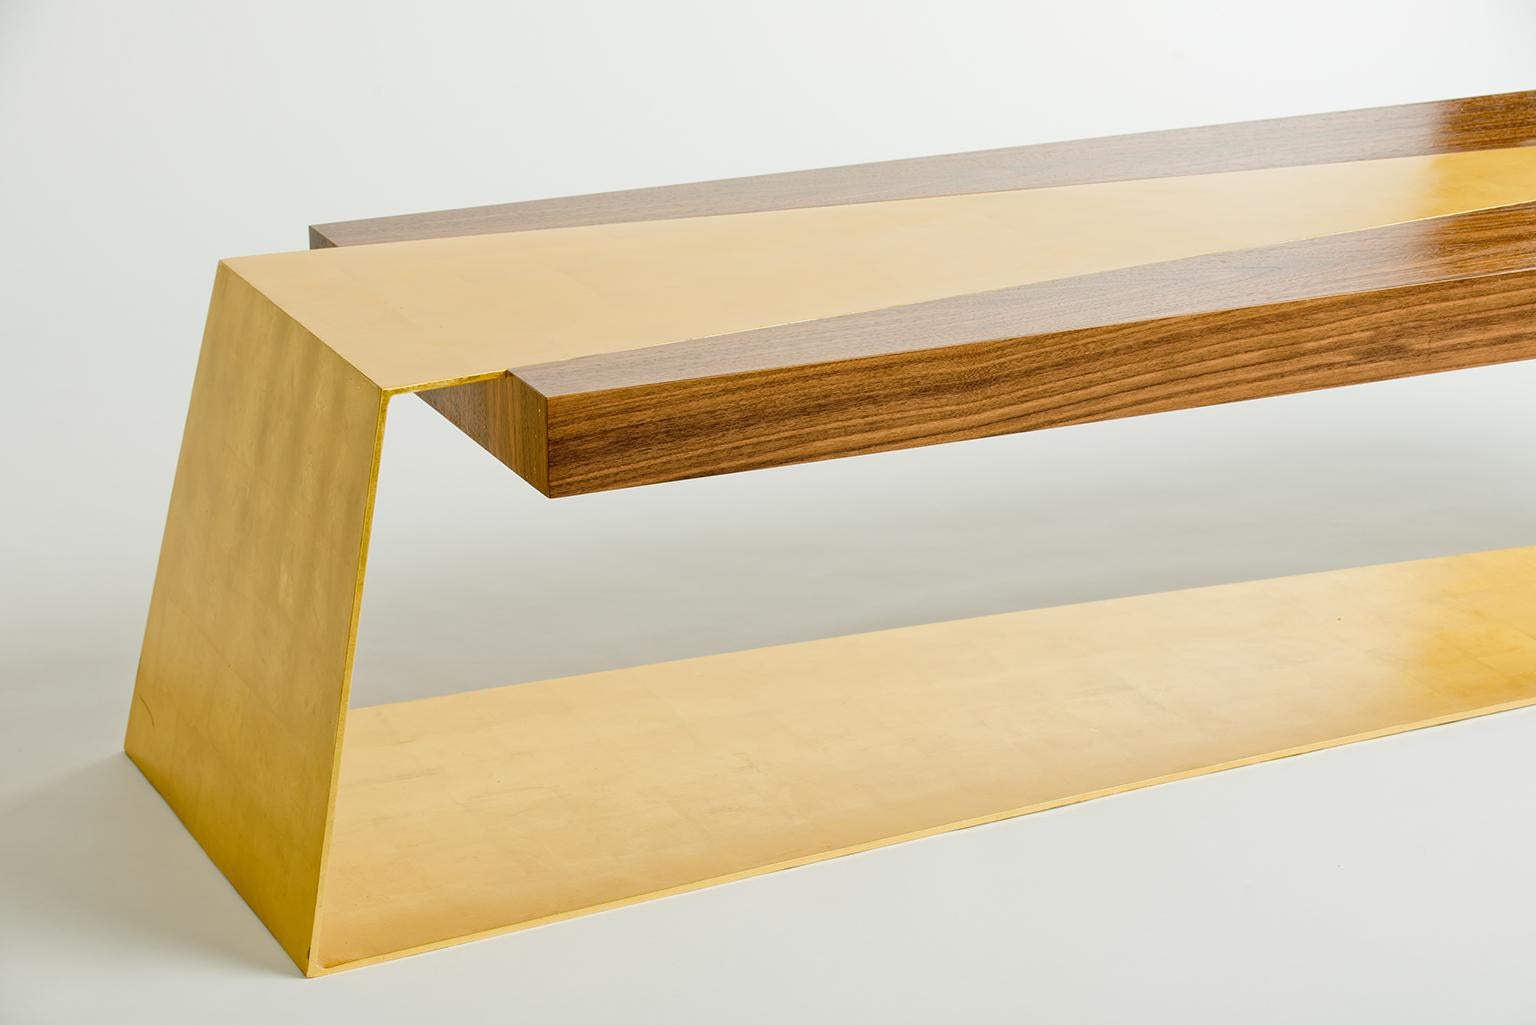 American Bowery Bench or Coffee Table, Walnut and Gold Leaf, by Dean and Dahl For Sale